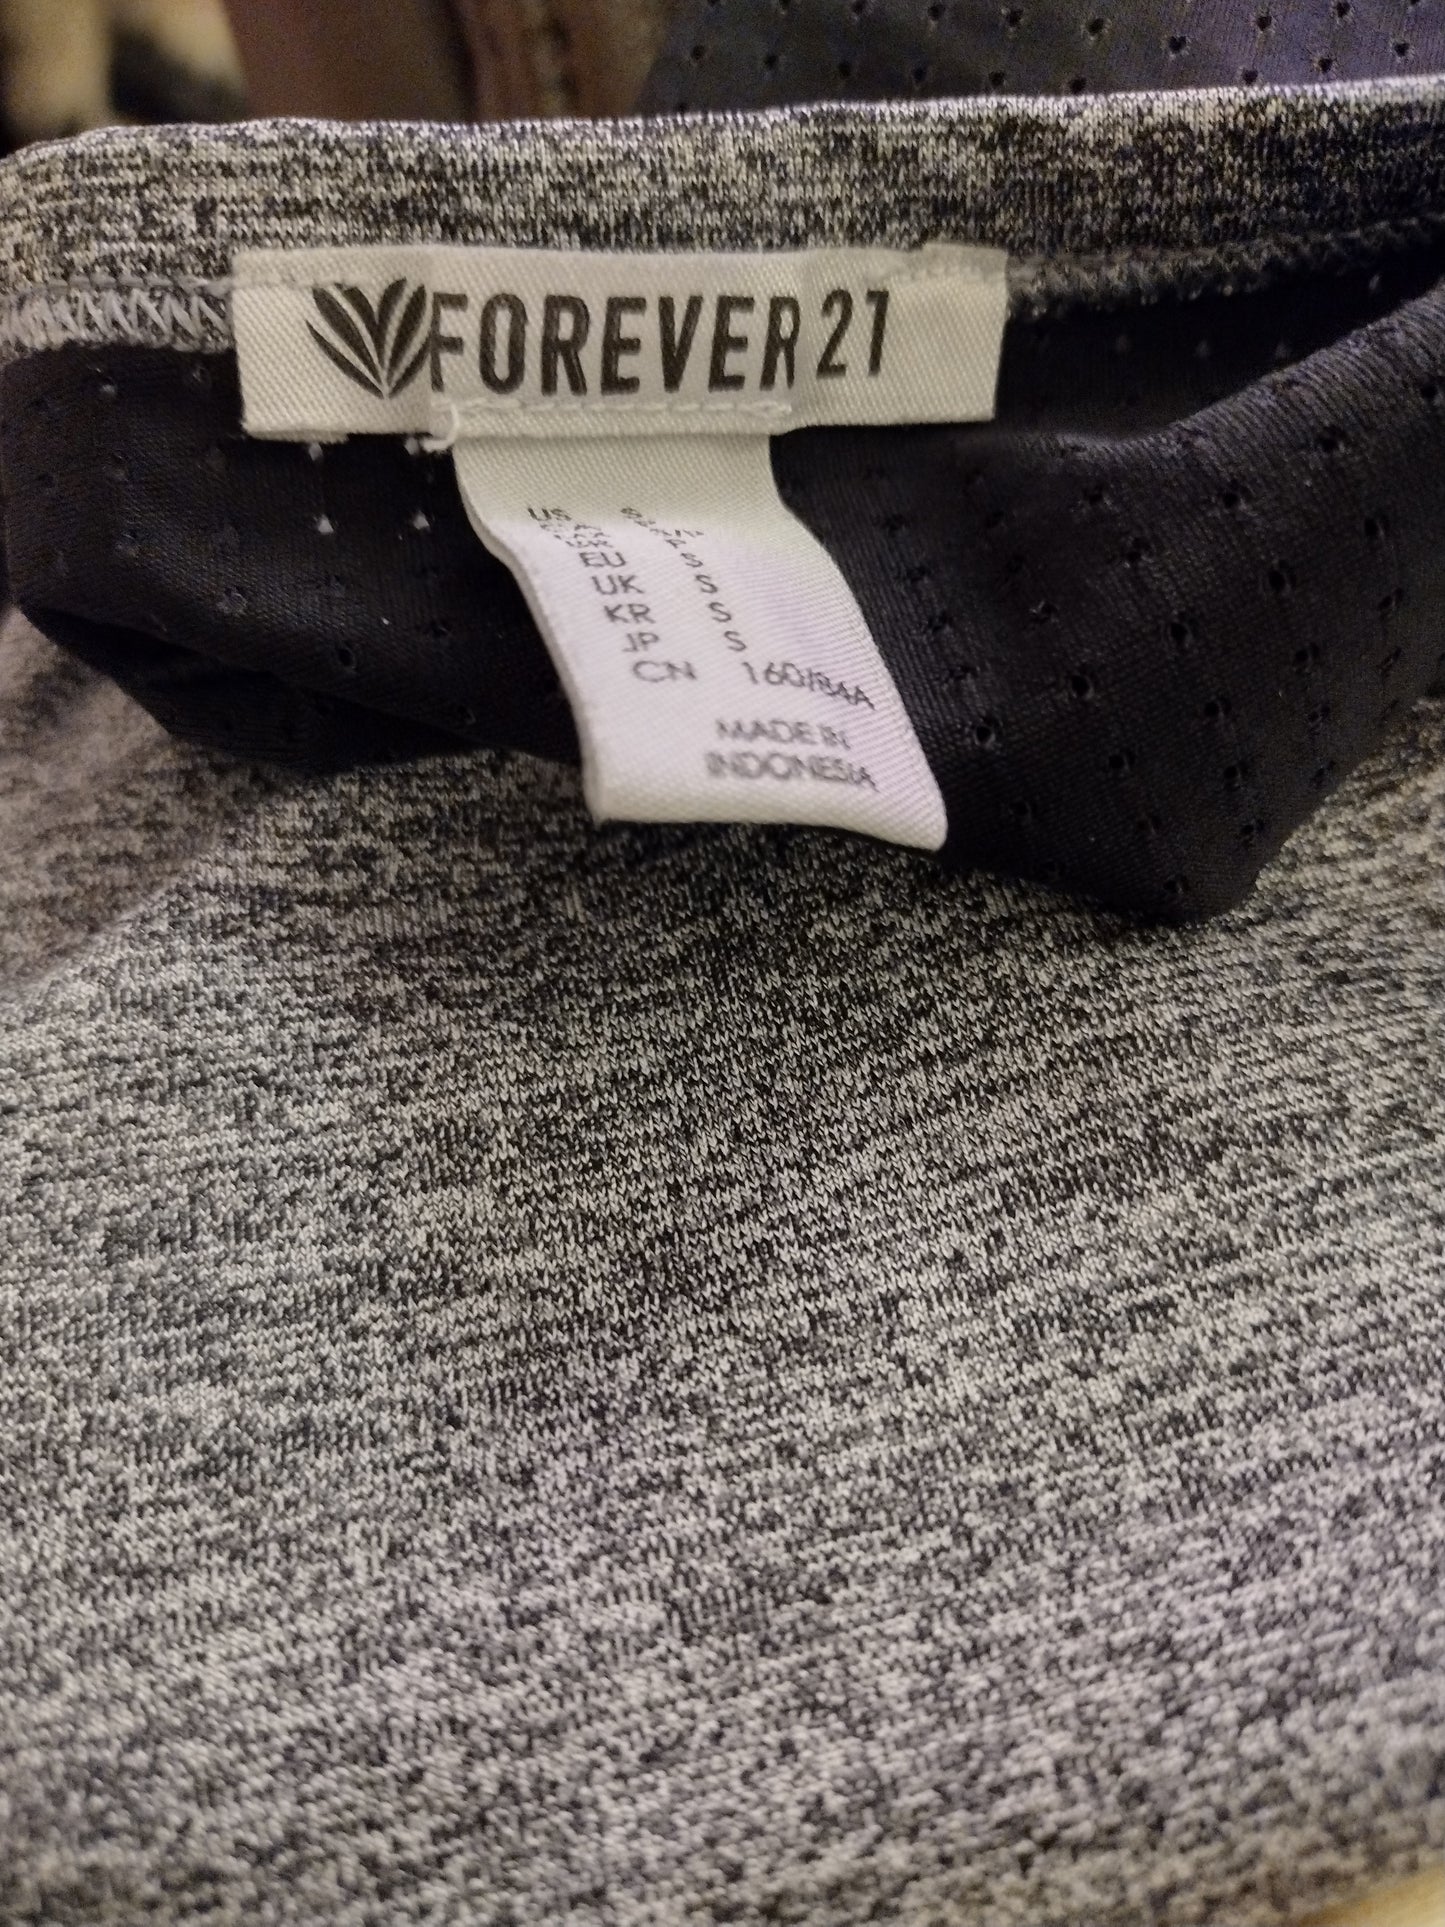 Forever 21 woman's sports bra